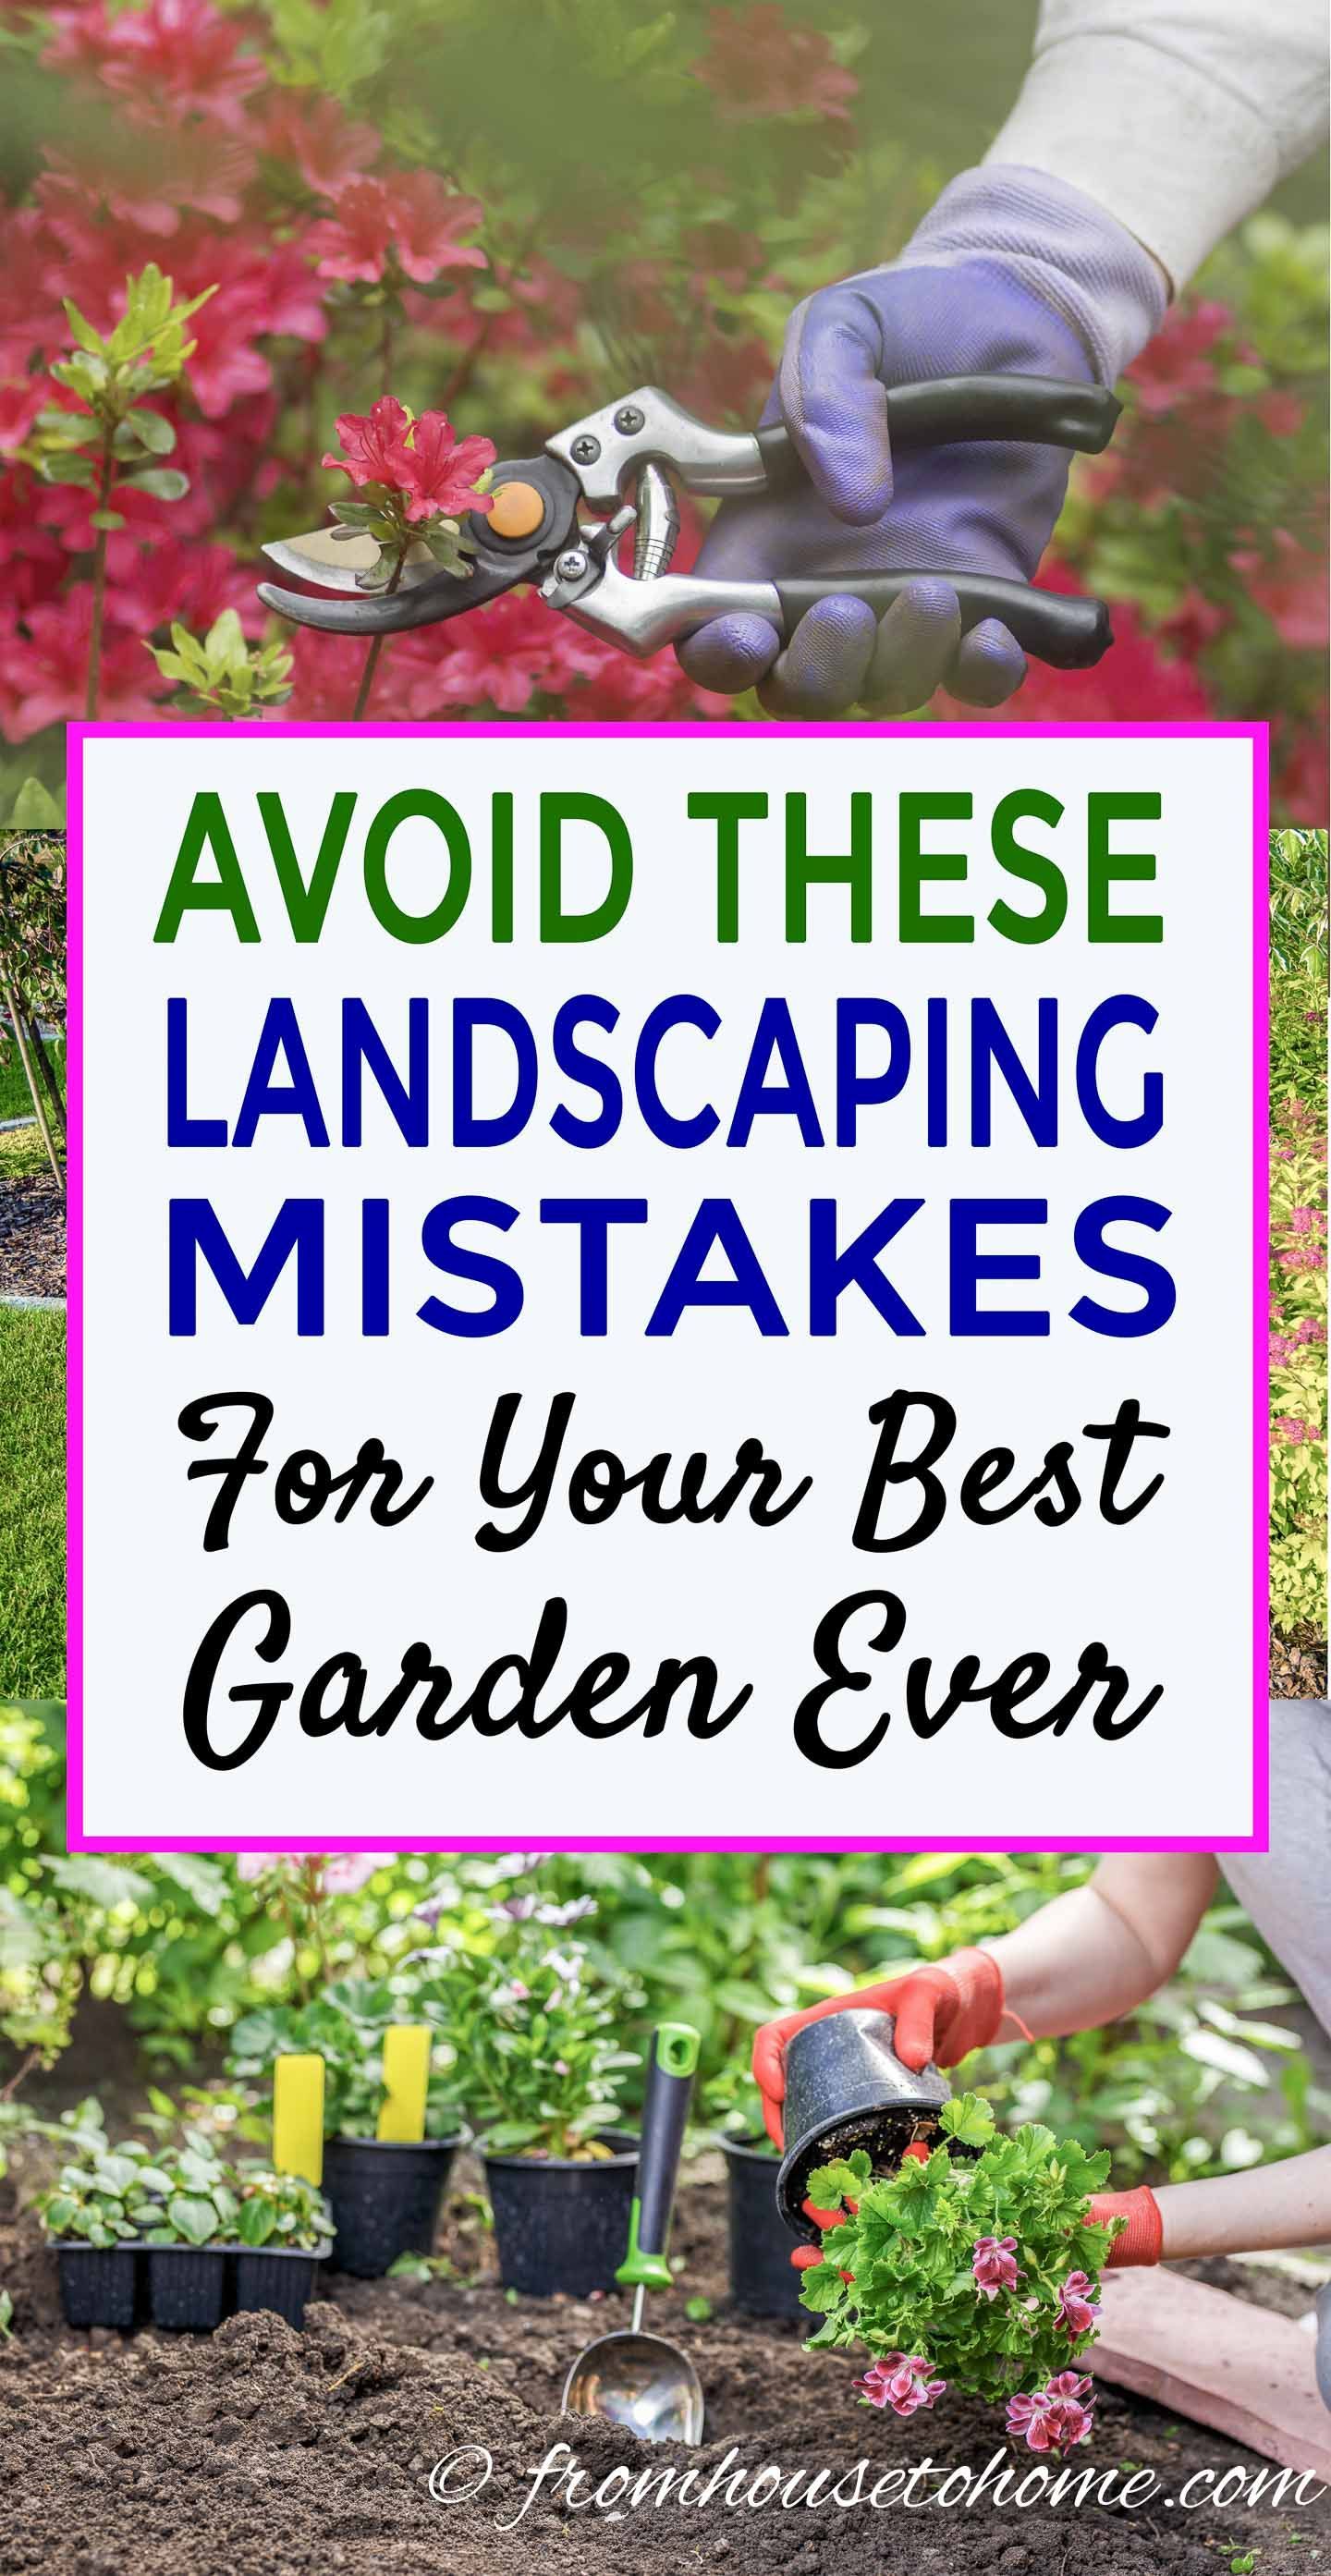 Avoid These 10 Landscaping Mistakes For Your Best Garden Ever -   17 plants Landscaping tips ideas